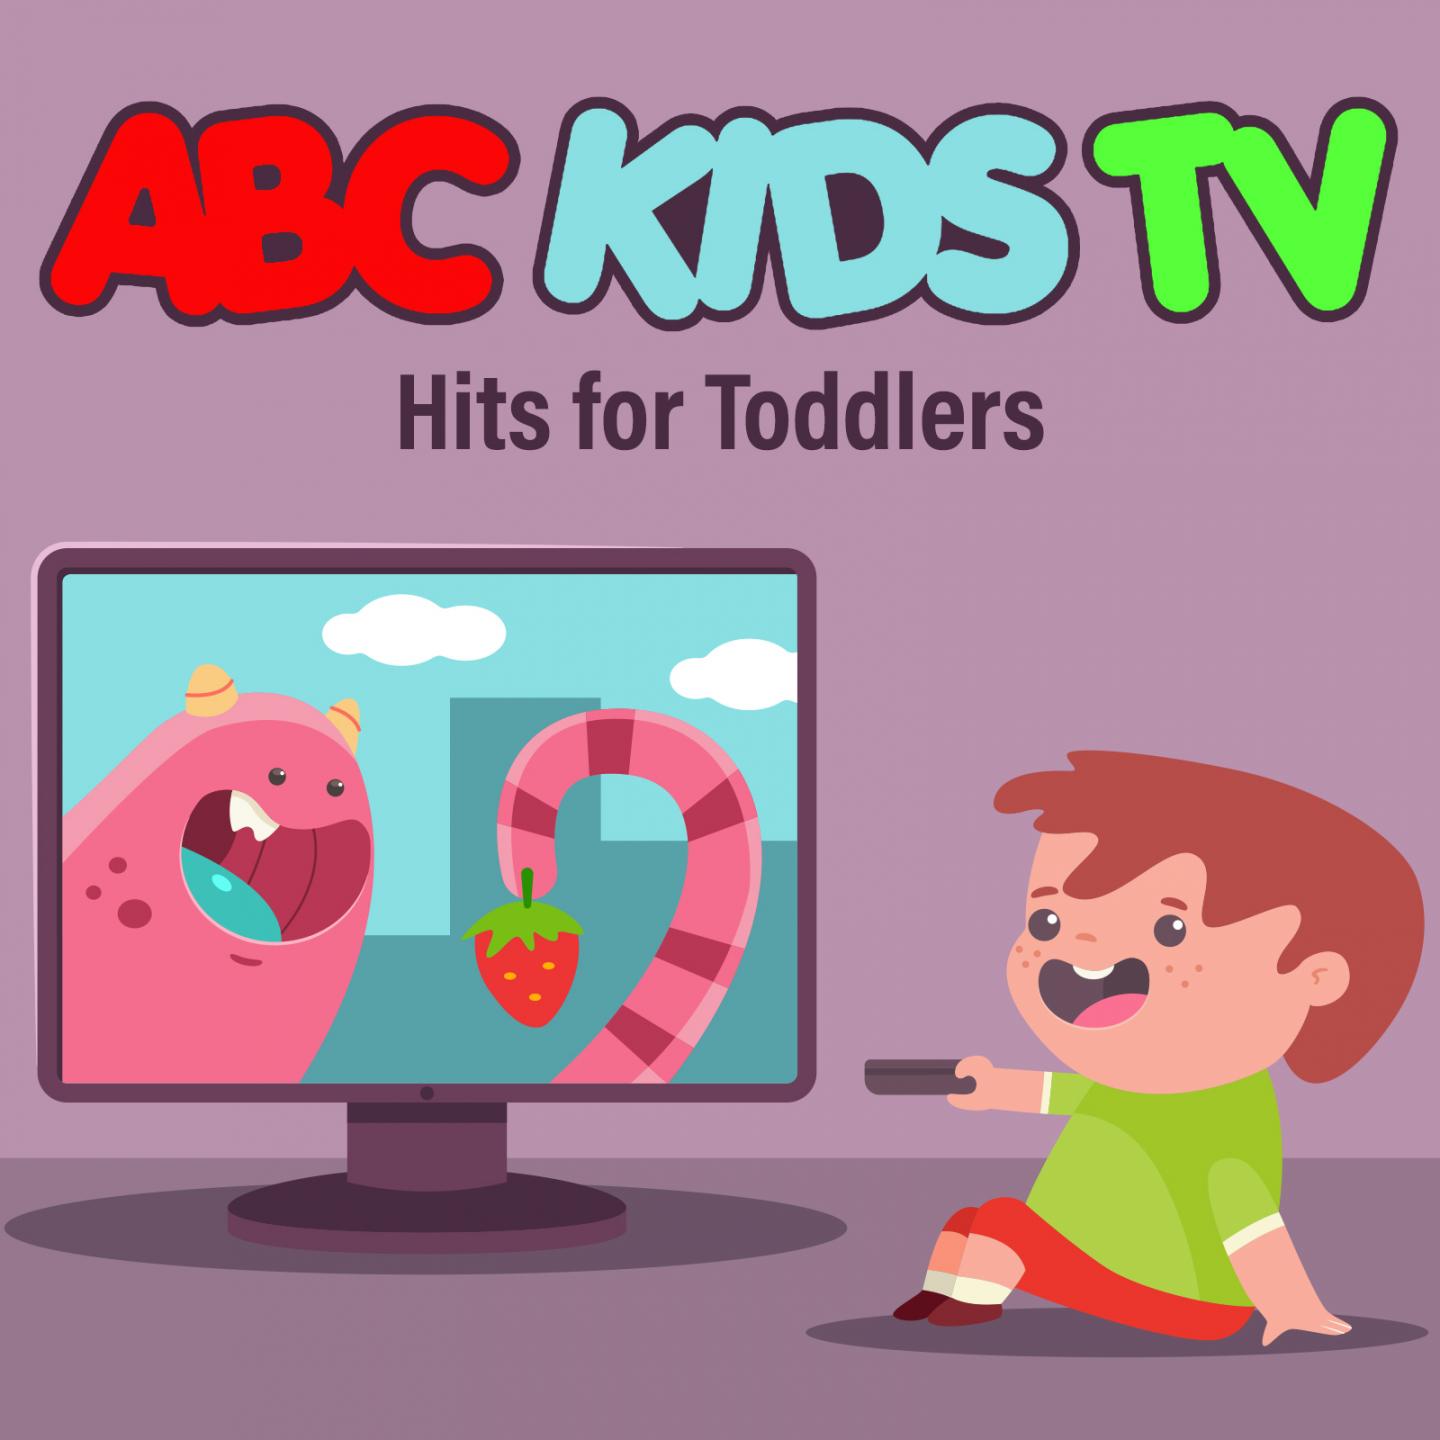 Abc Kids Tv Hits for Toddlers